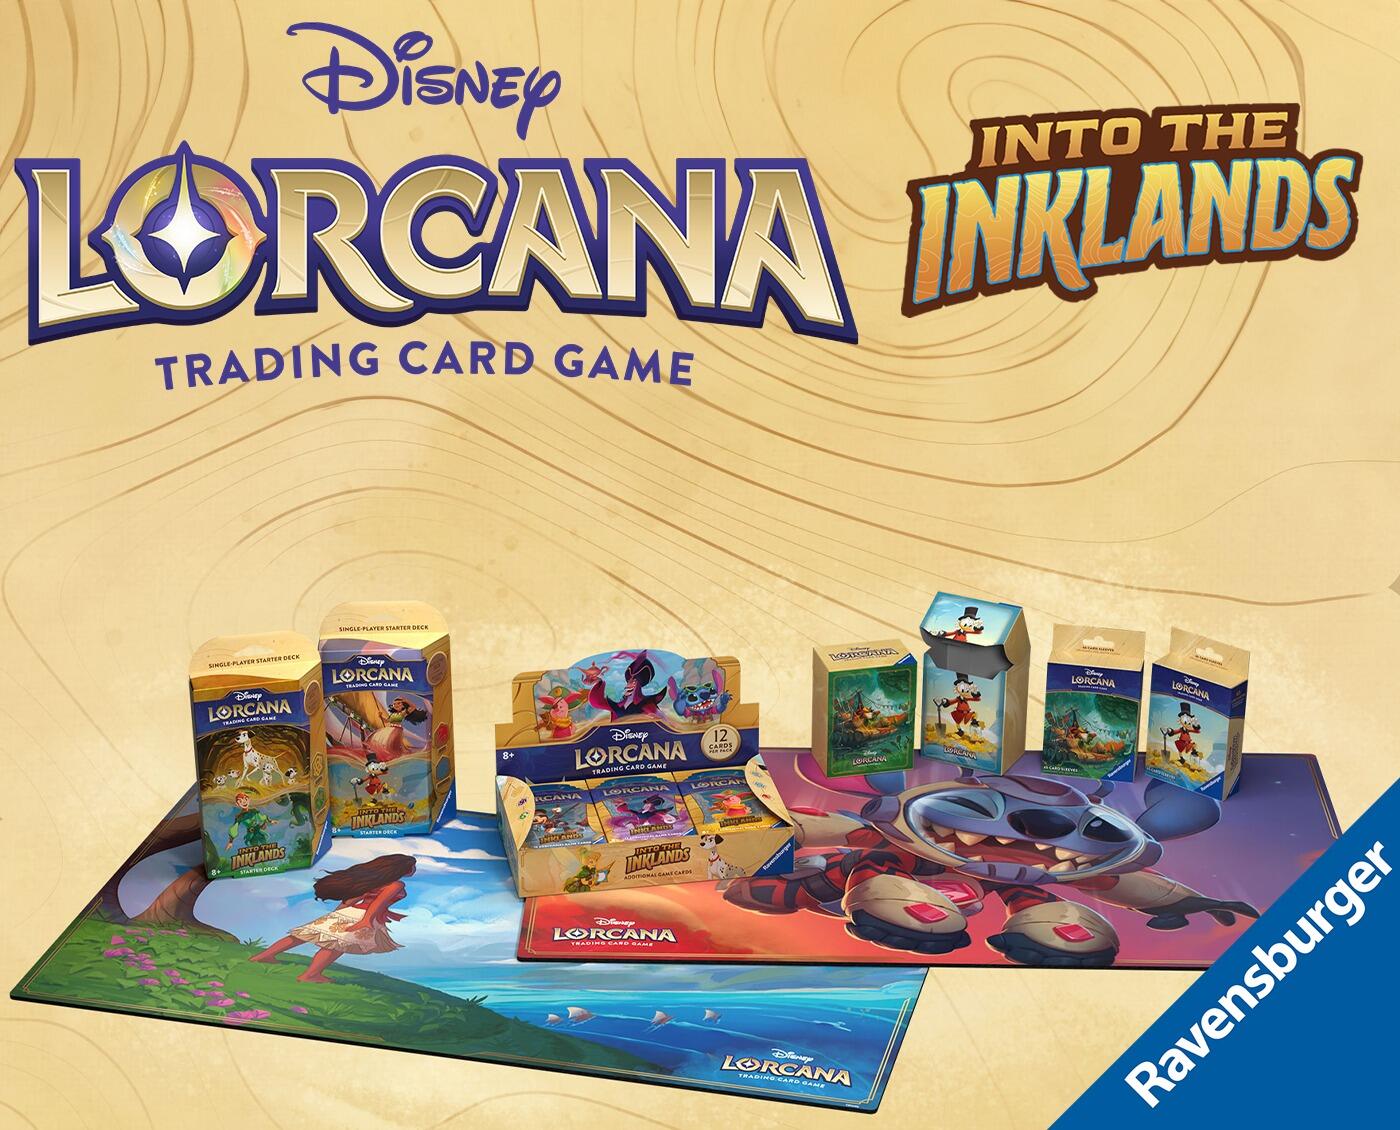 Disney Lorcana|Into the Inklands Launches In-Store Friday, 23rd Feb. Pre-Order now for Online Orders shipping 8th March.